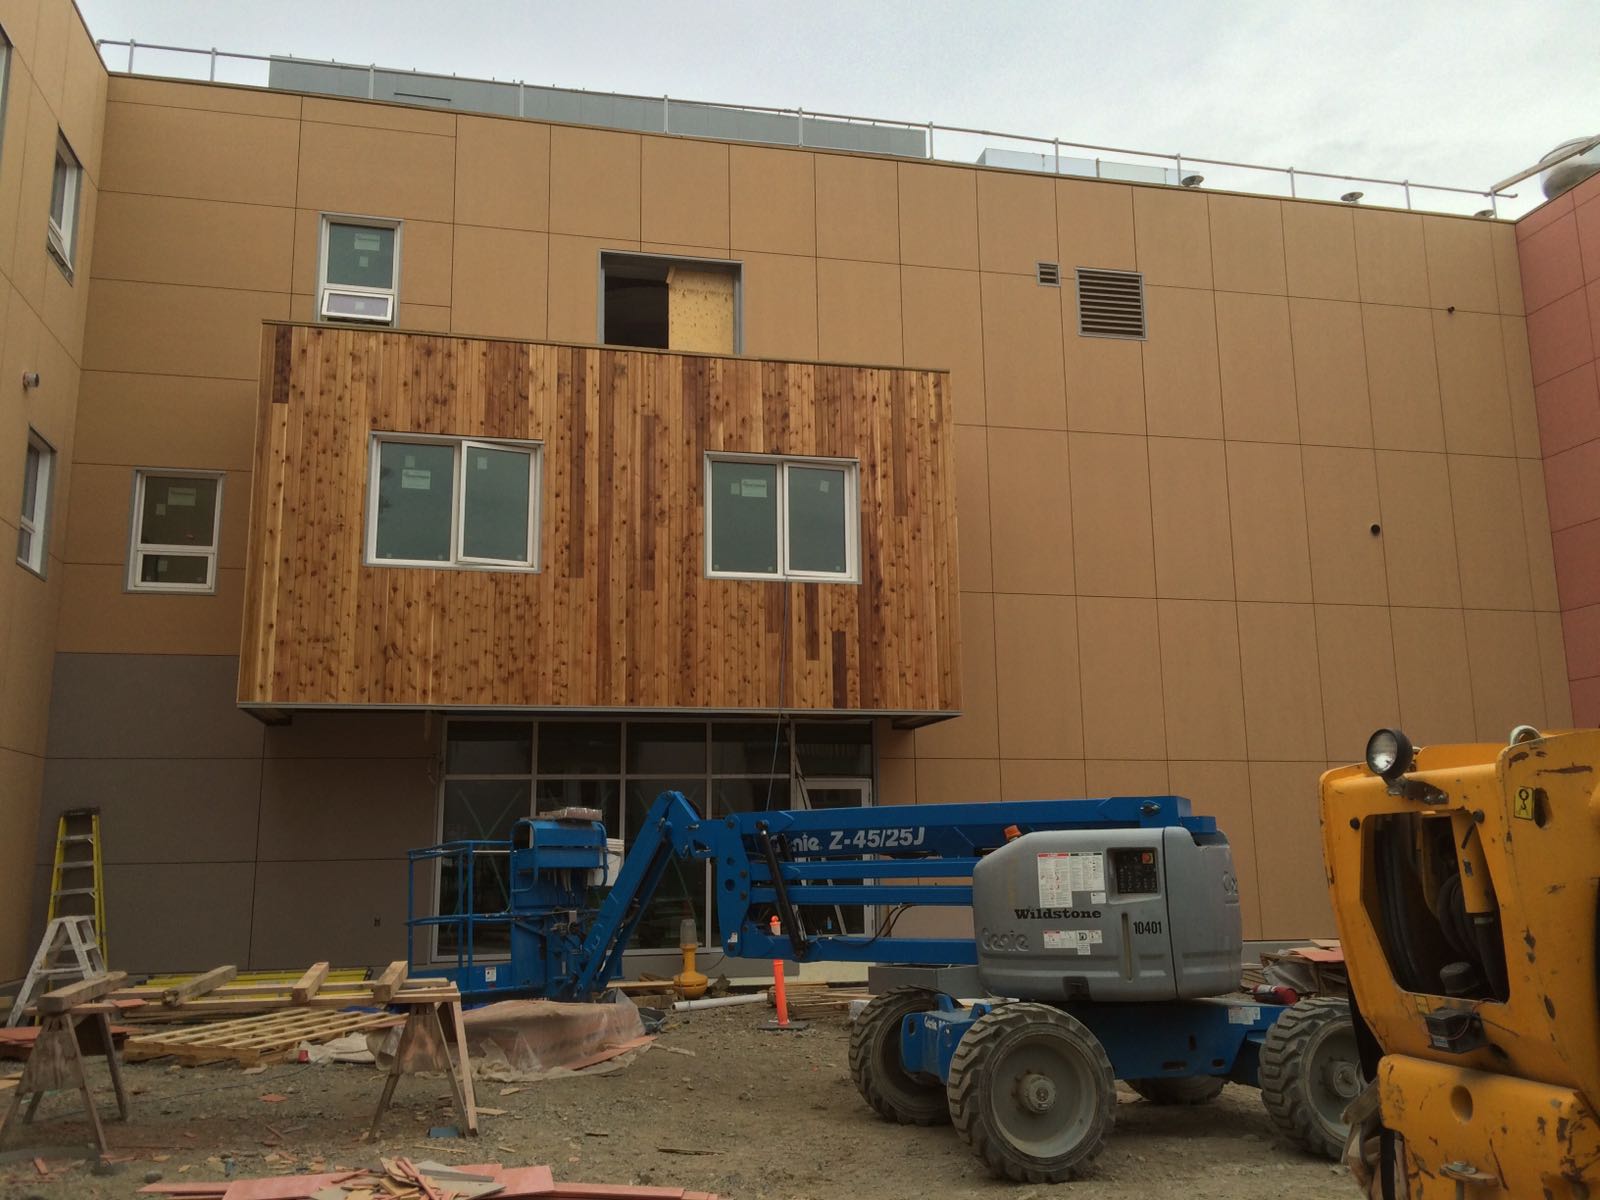 Sarah Steele Alcohol and Drug Services building Whitehorse 5